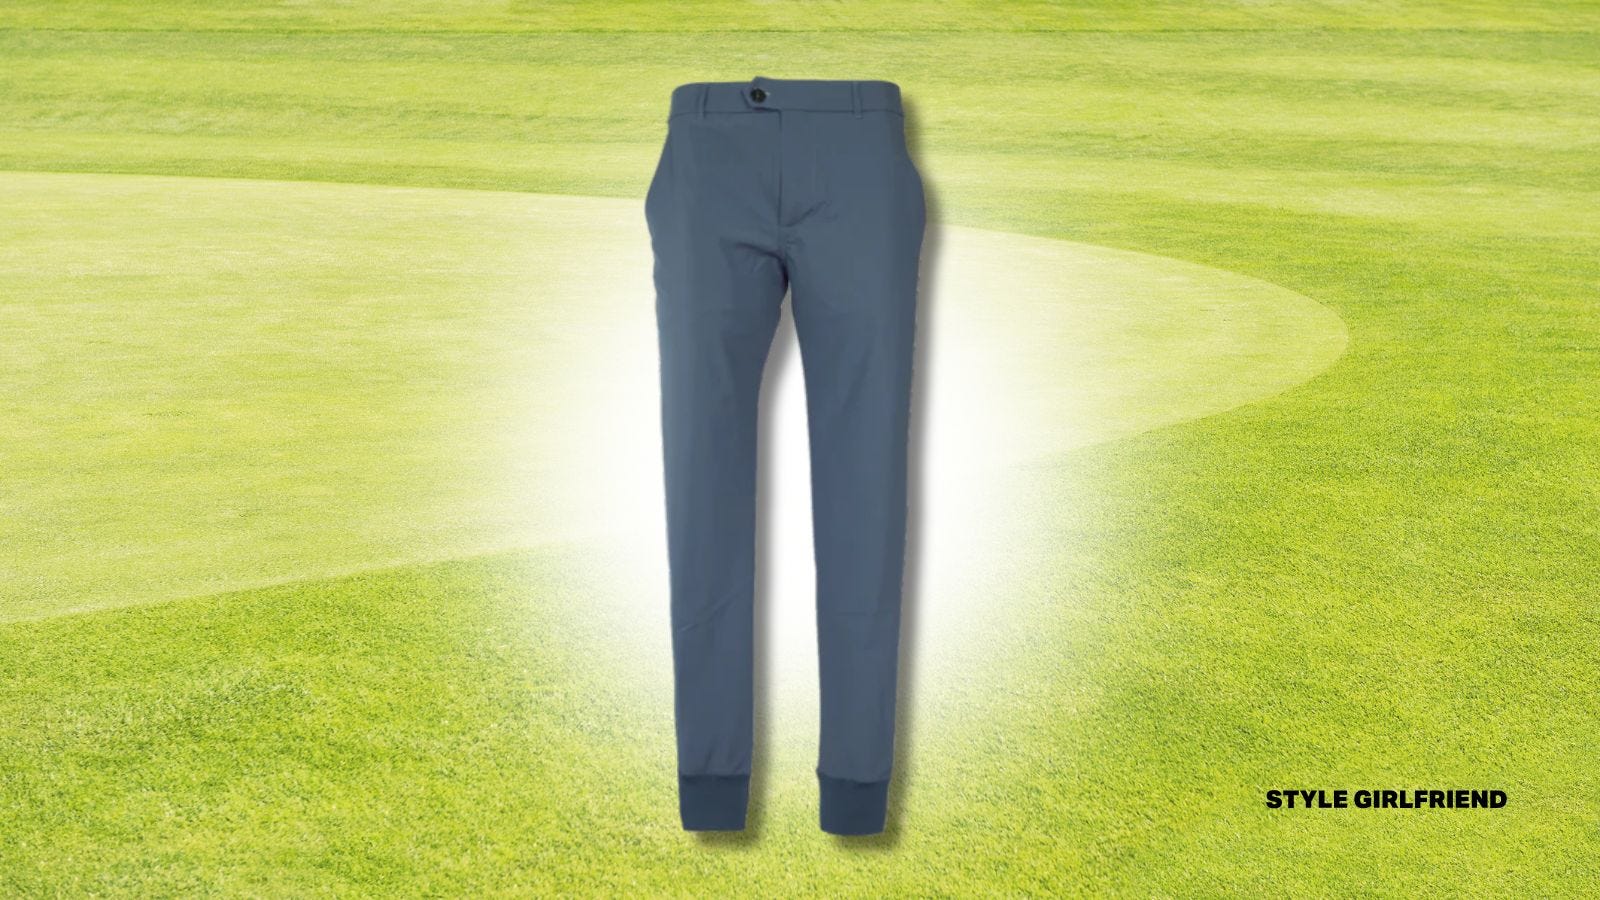 pair of blue greyson montauk joggers set against an image of a golf green